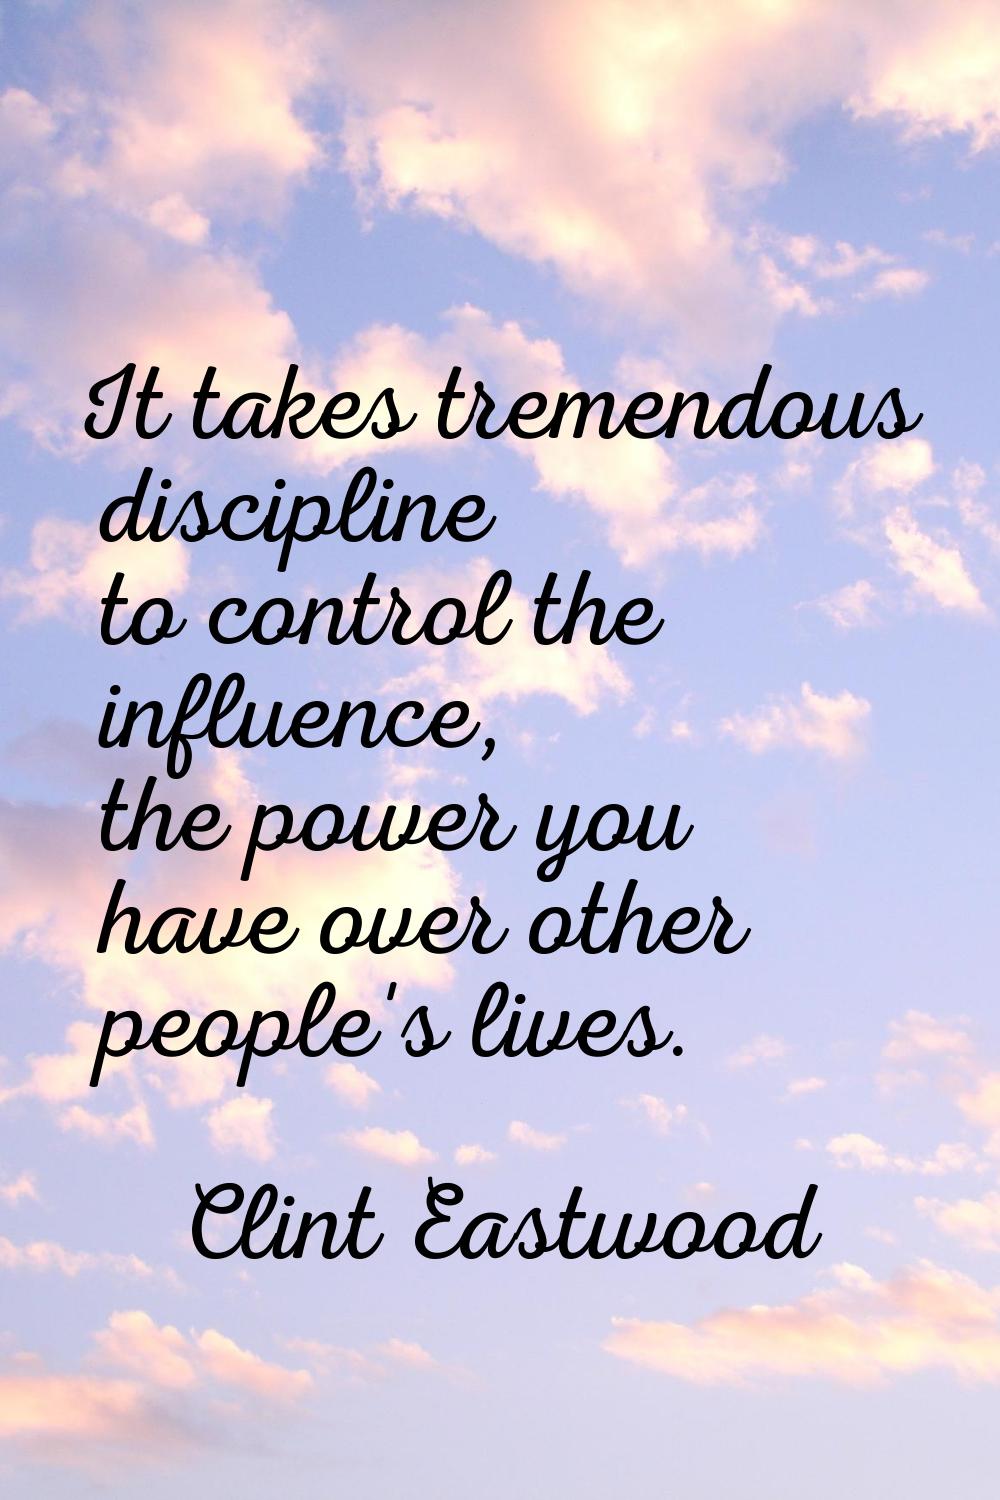 It takes tremendous discipline to control the influence, the power you have over other people's liv